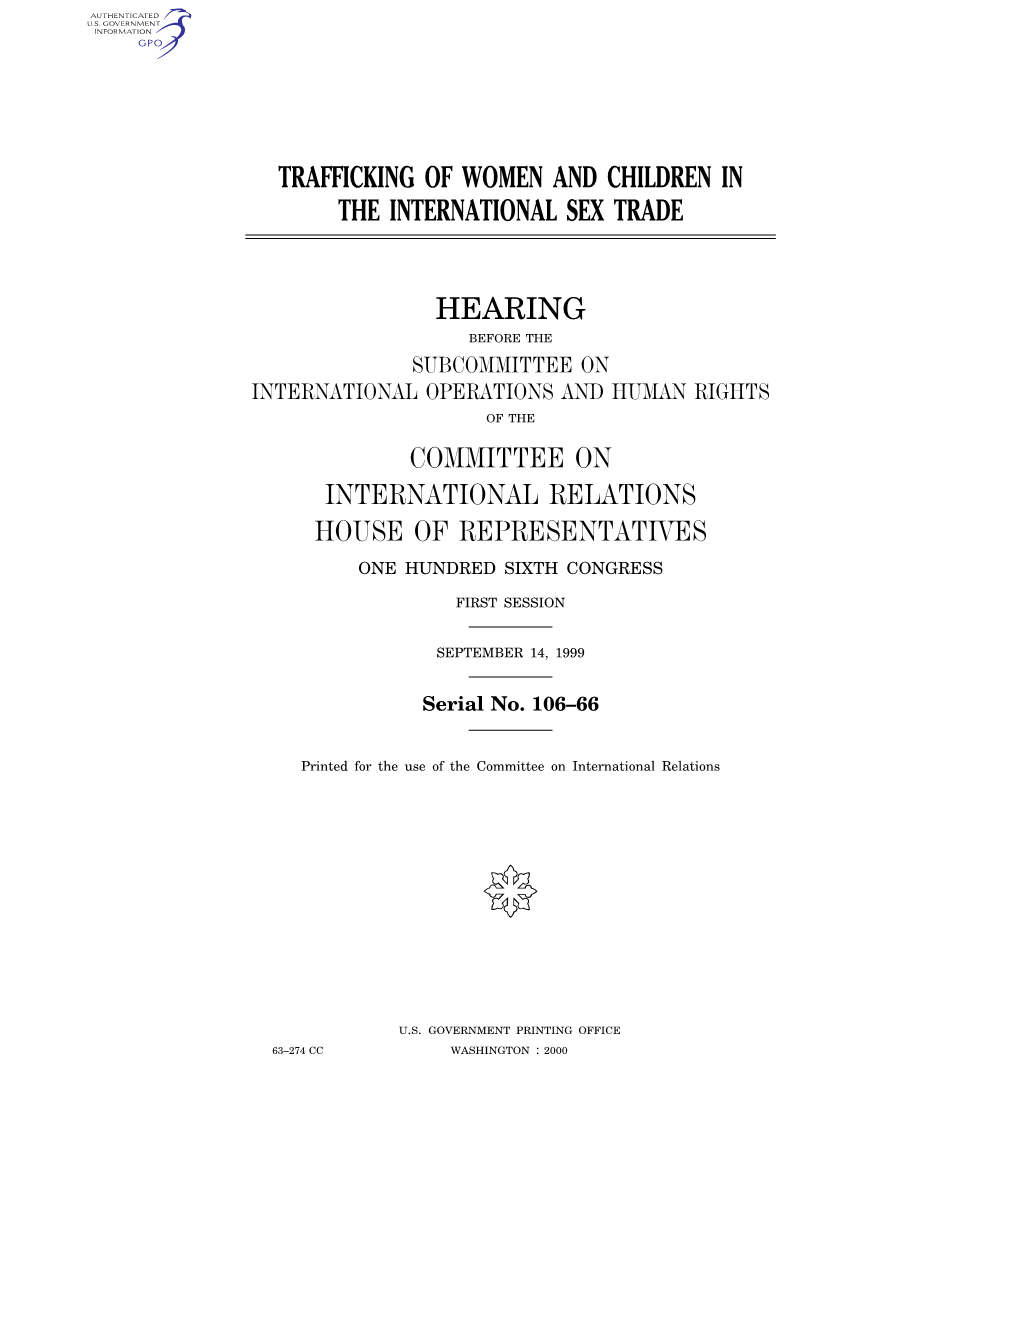 Trafficking of Women and Children in the International Sex Trade Hearing